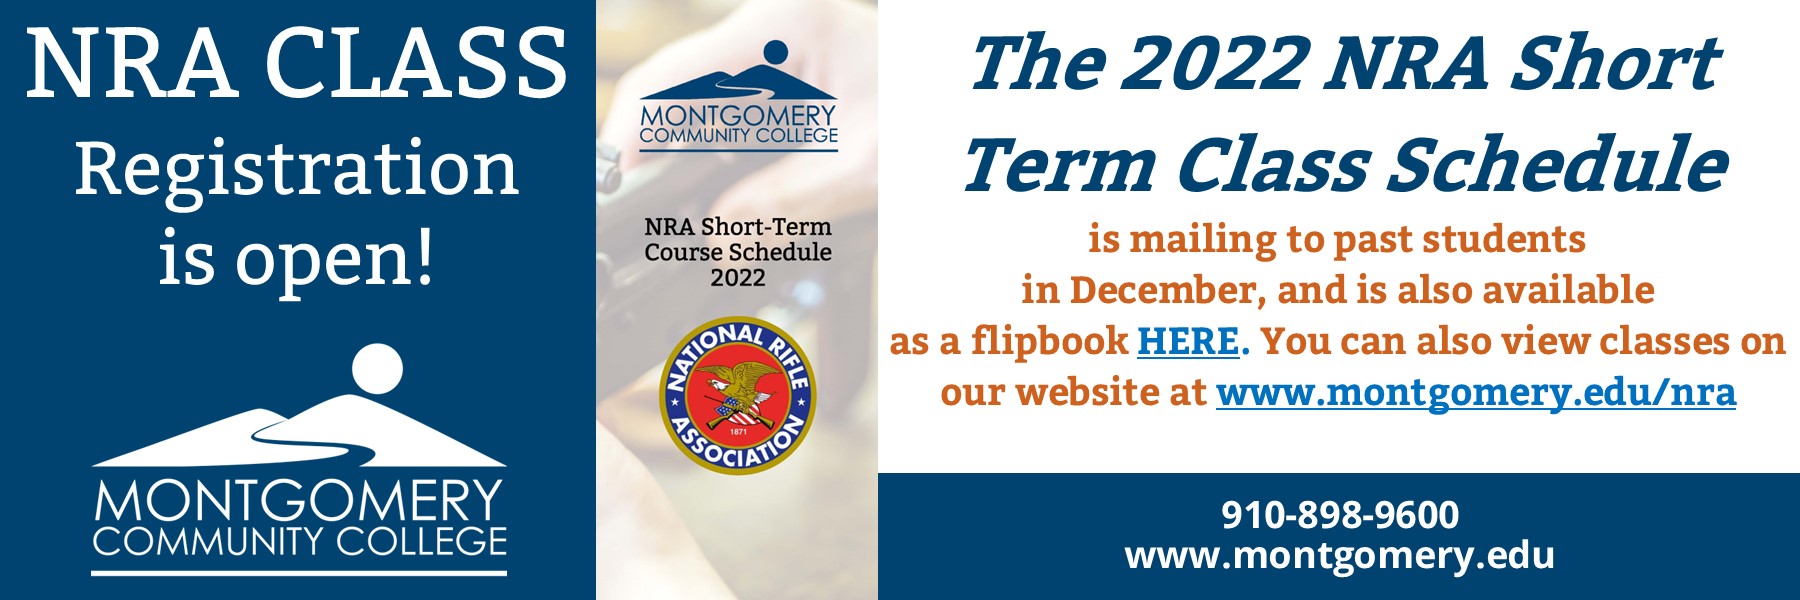 NRA Class Registration is open! The 2022 NRA Short Term Class Schedule is mailing to past students in December, and is also available as a flipbook here. You can also view classes on our website at www.montgomery.edu/nra. 910-898-9600.